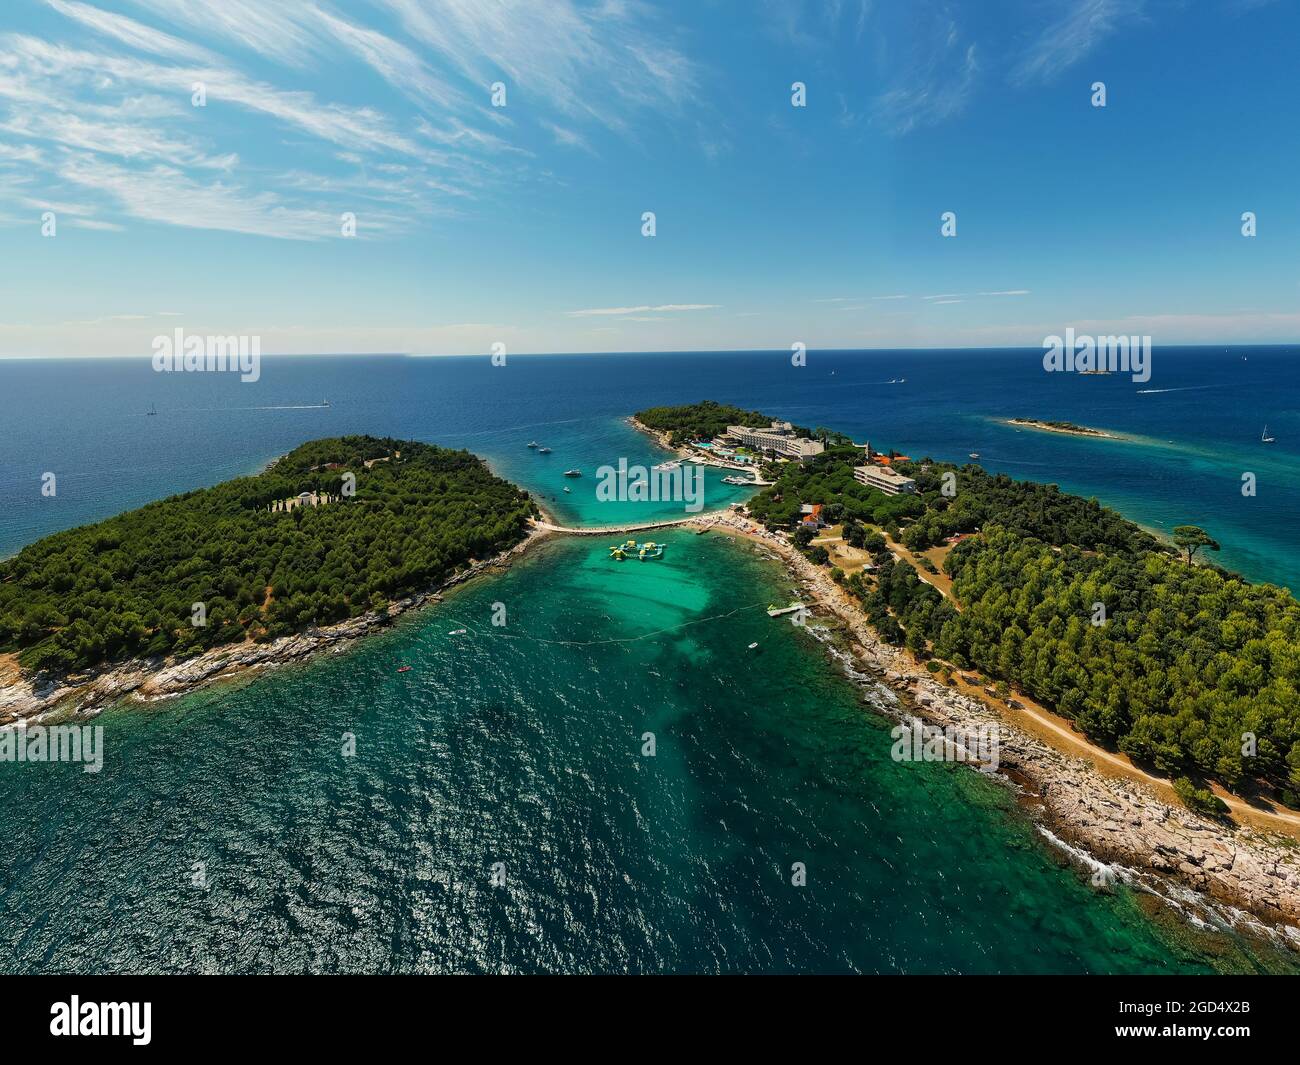 Red island near by Rovinj city in Croatia. Croatian name is Otocic Maskin. It has a hotel, aquapark, chruch monument and amazing beaches Stock Photo